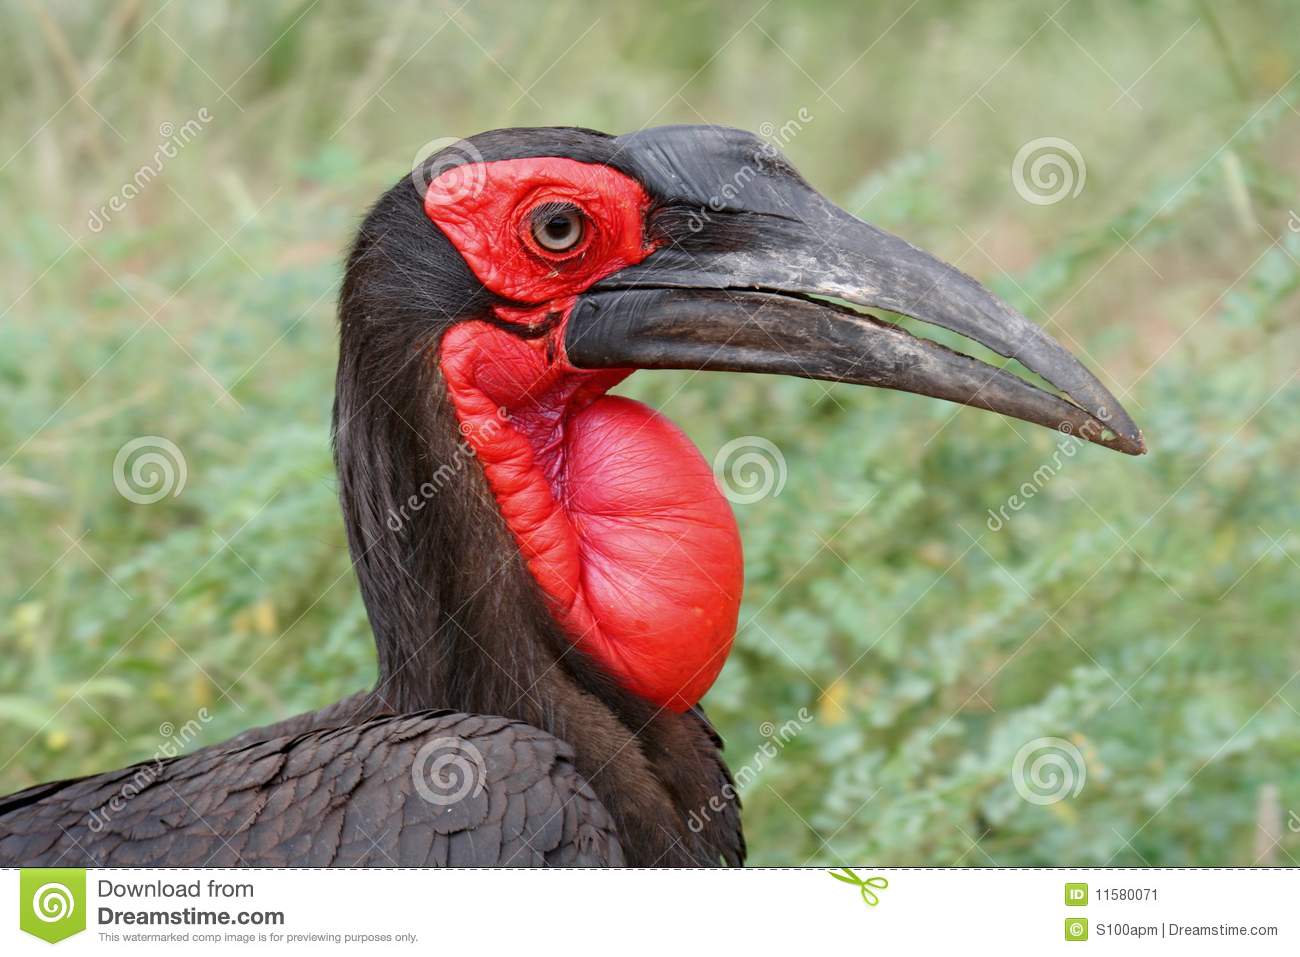 Southern Ground Hornbill clipart #15, Download drawings